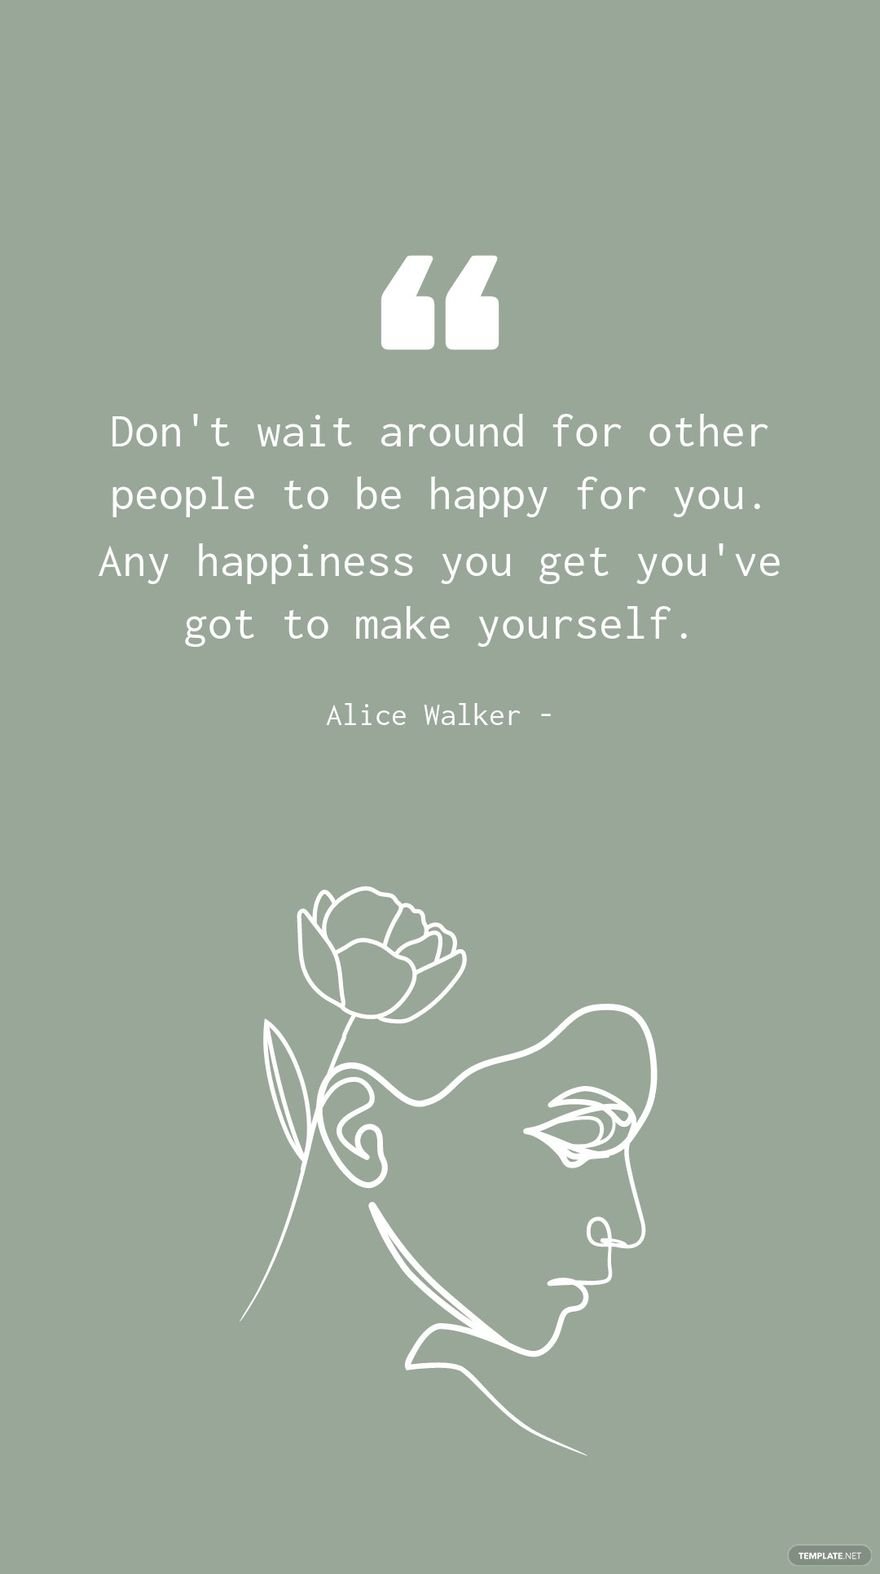 Alice Walker - Don't wait around for other people to be happy for you. Any happiness you get you've got to make yourself.